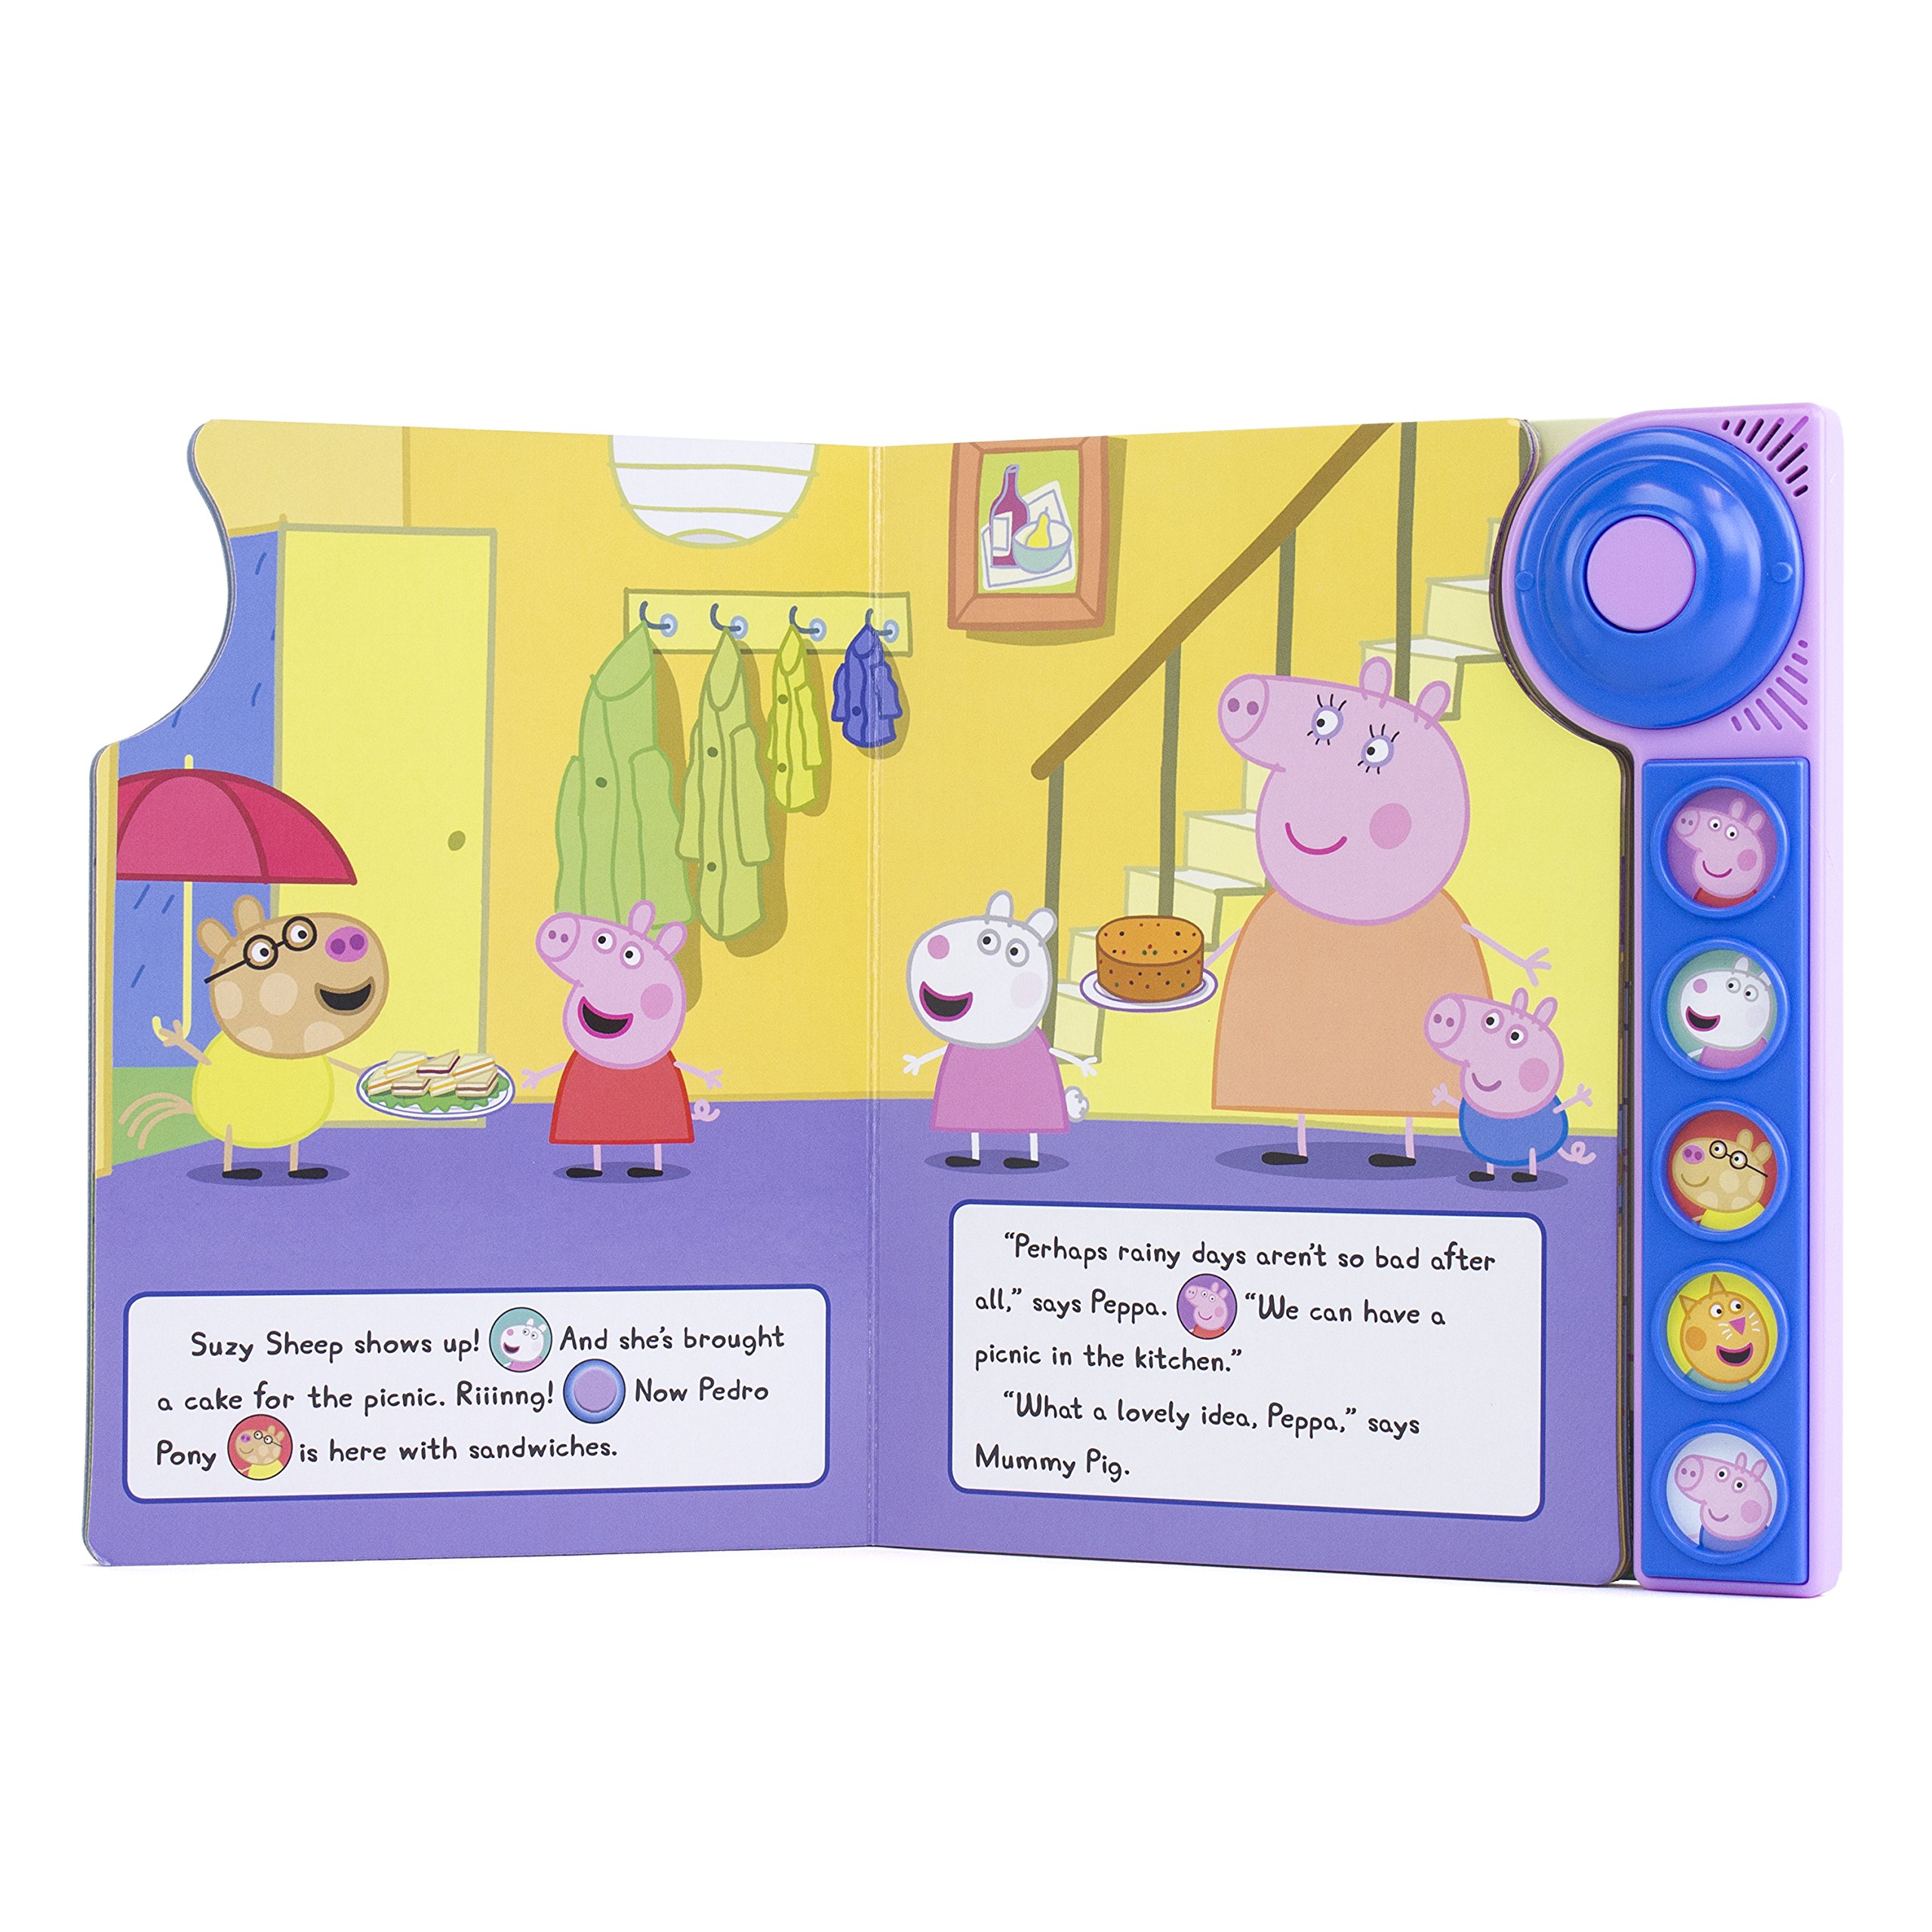 Peppa Pig - Ding! Dong! Let's Play! Doorbell Sound Book - PI Kids (Play-A-Sound)